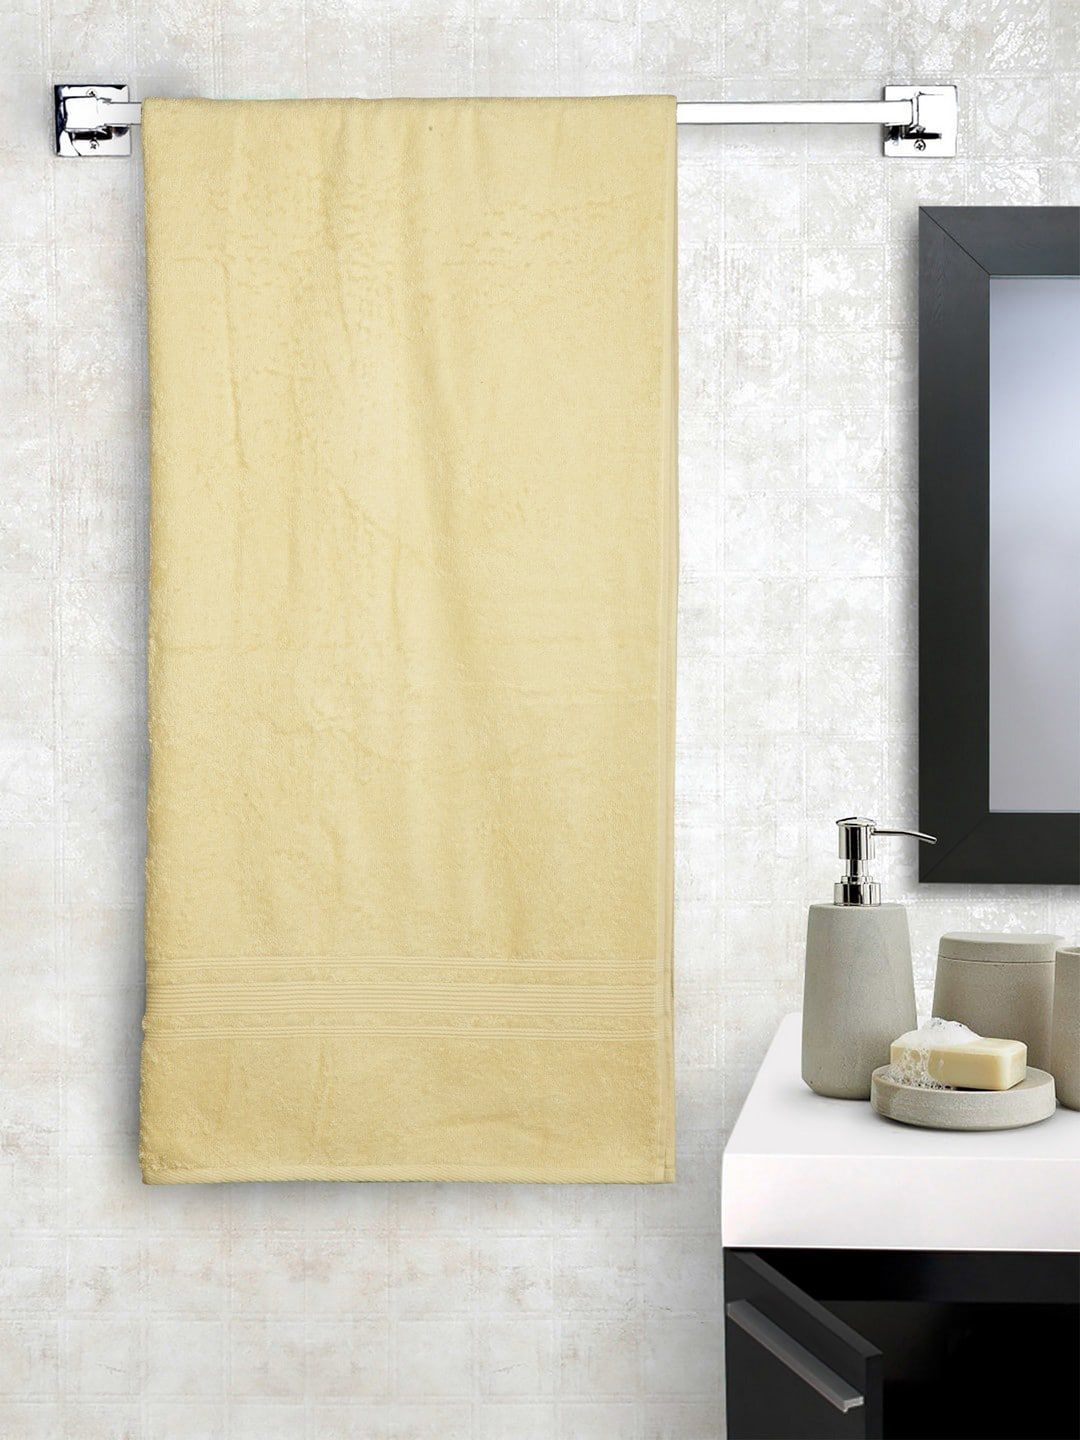 Lushomes Cream Colored Solid 450 GSM Bath Towel Price in India